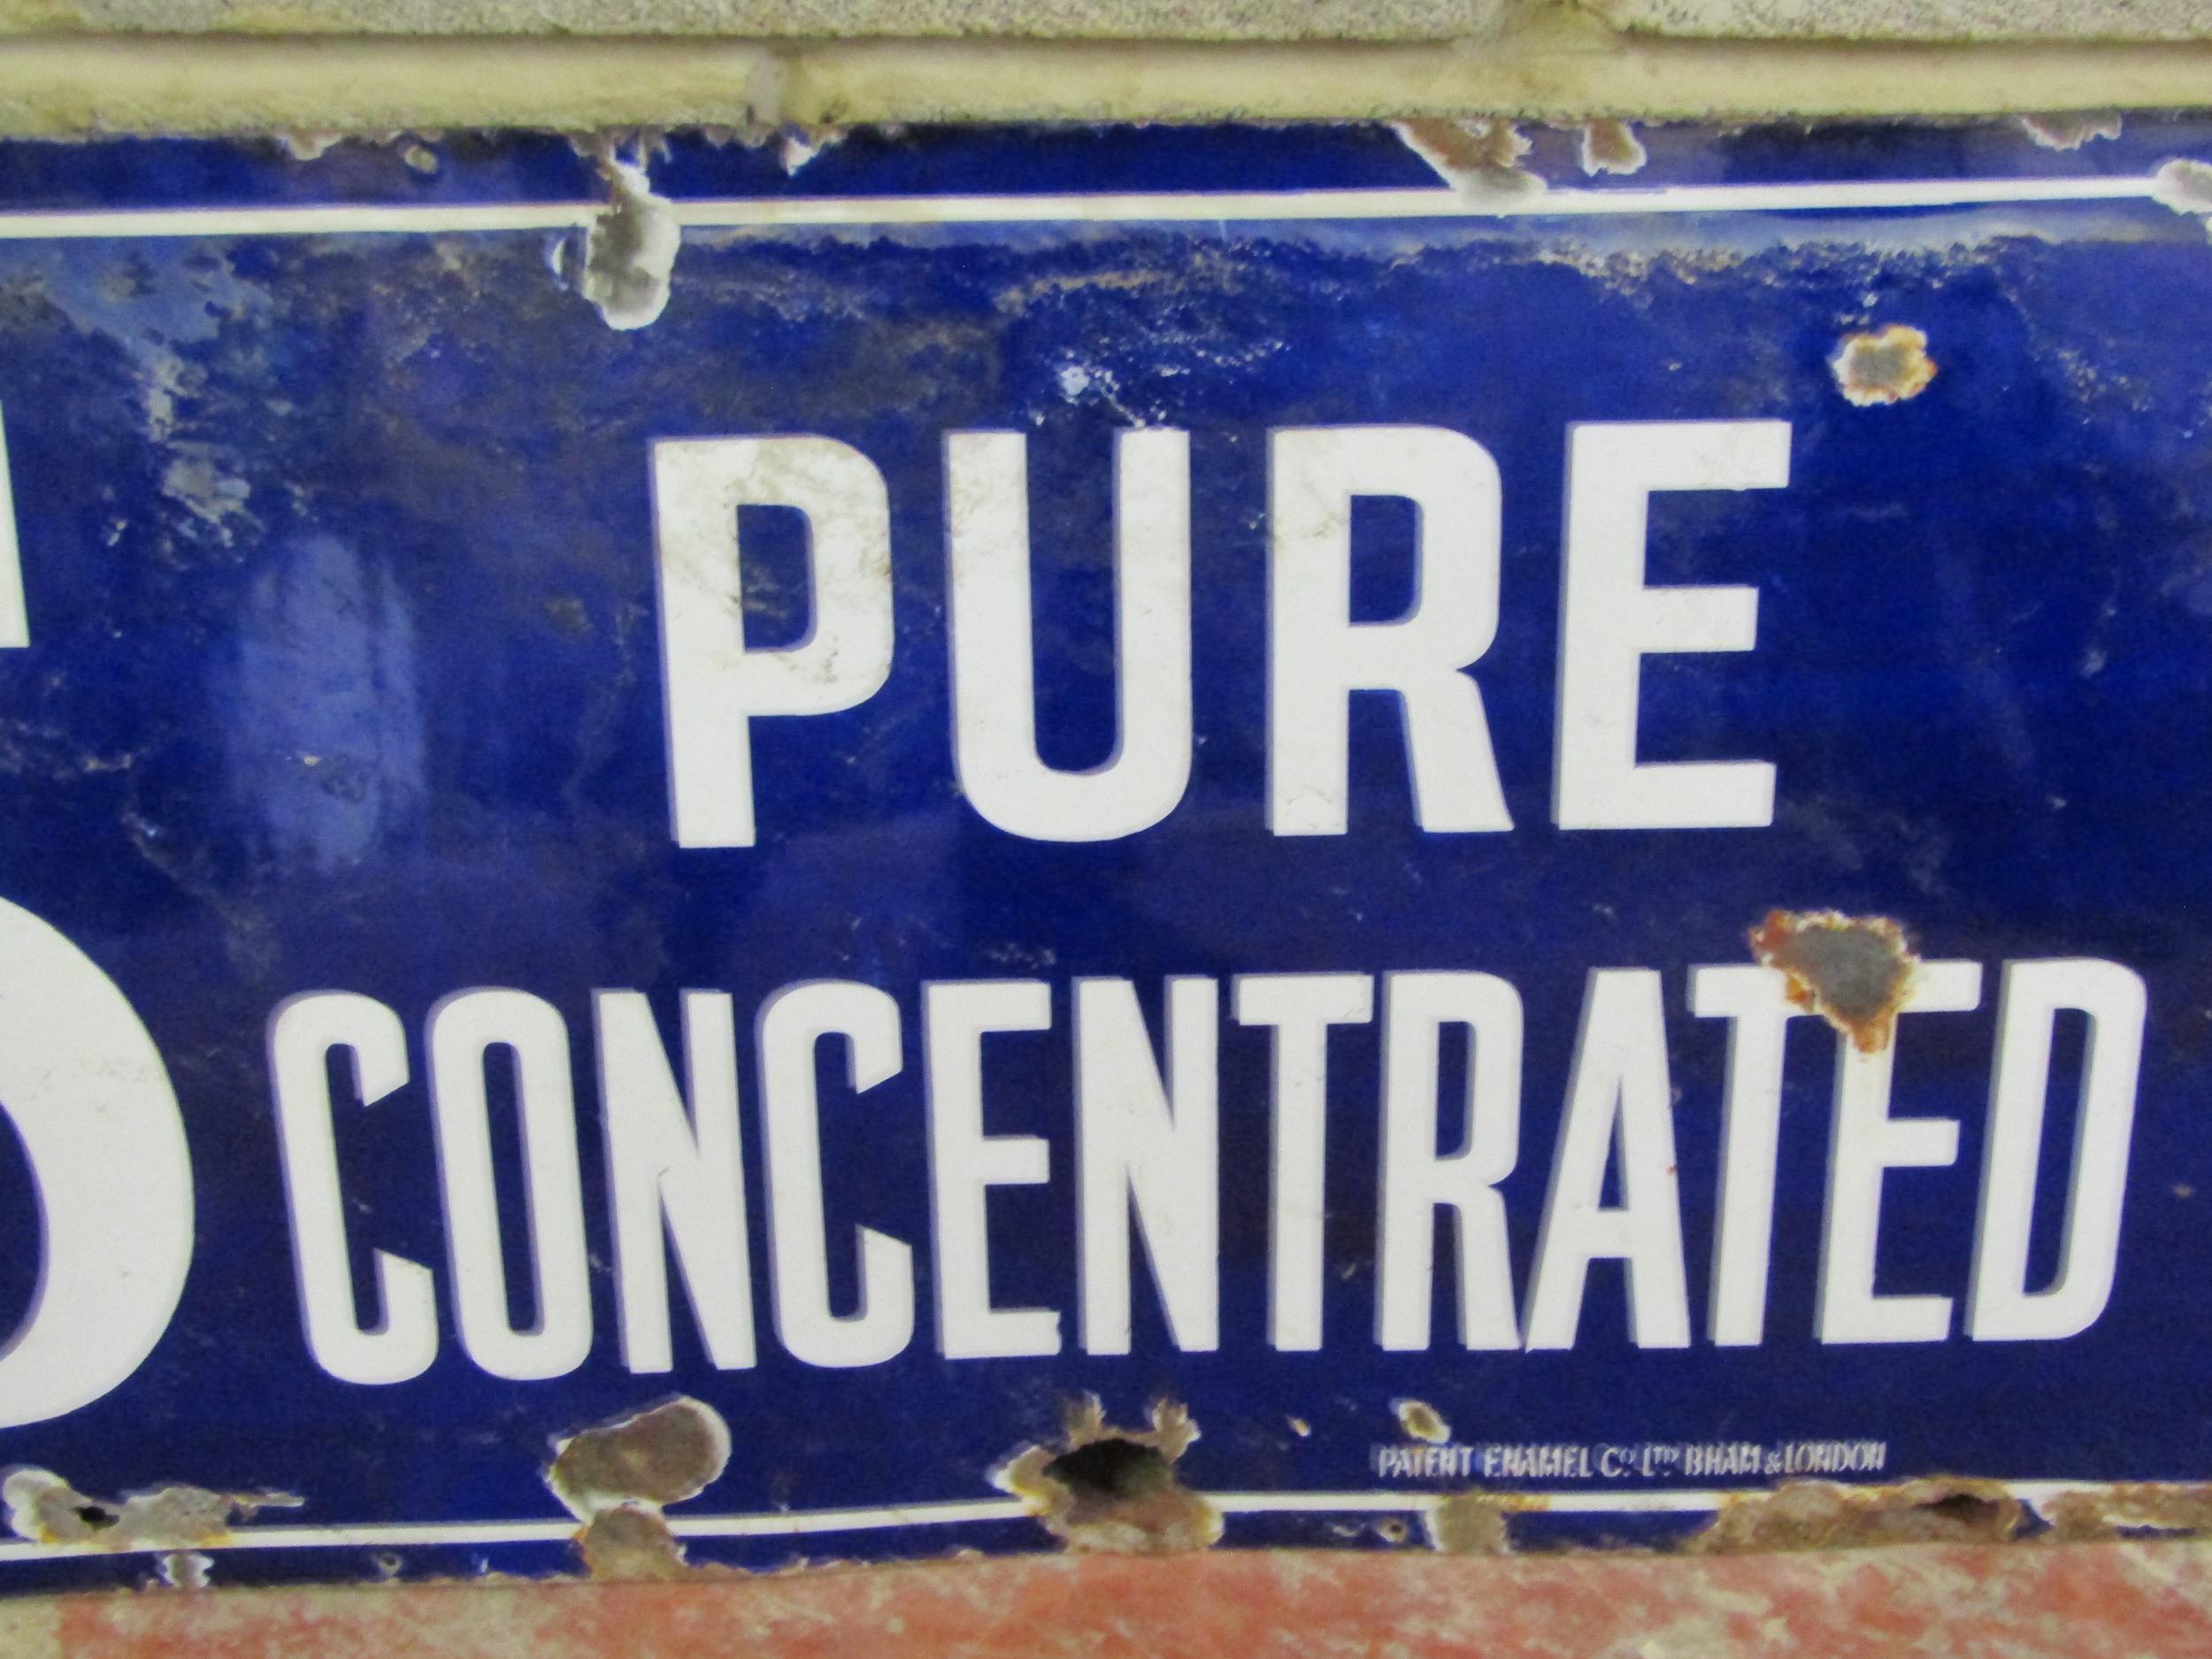 An old rectangular enamel sign advertising Fry's Pure Concentrated Cocoa 51 cm x 230 cm - Image 3 of 6